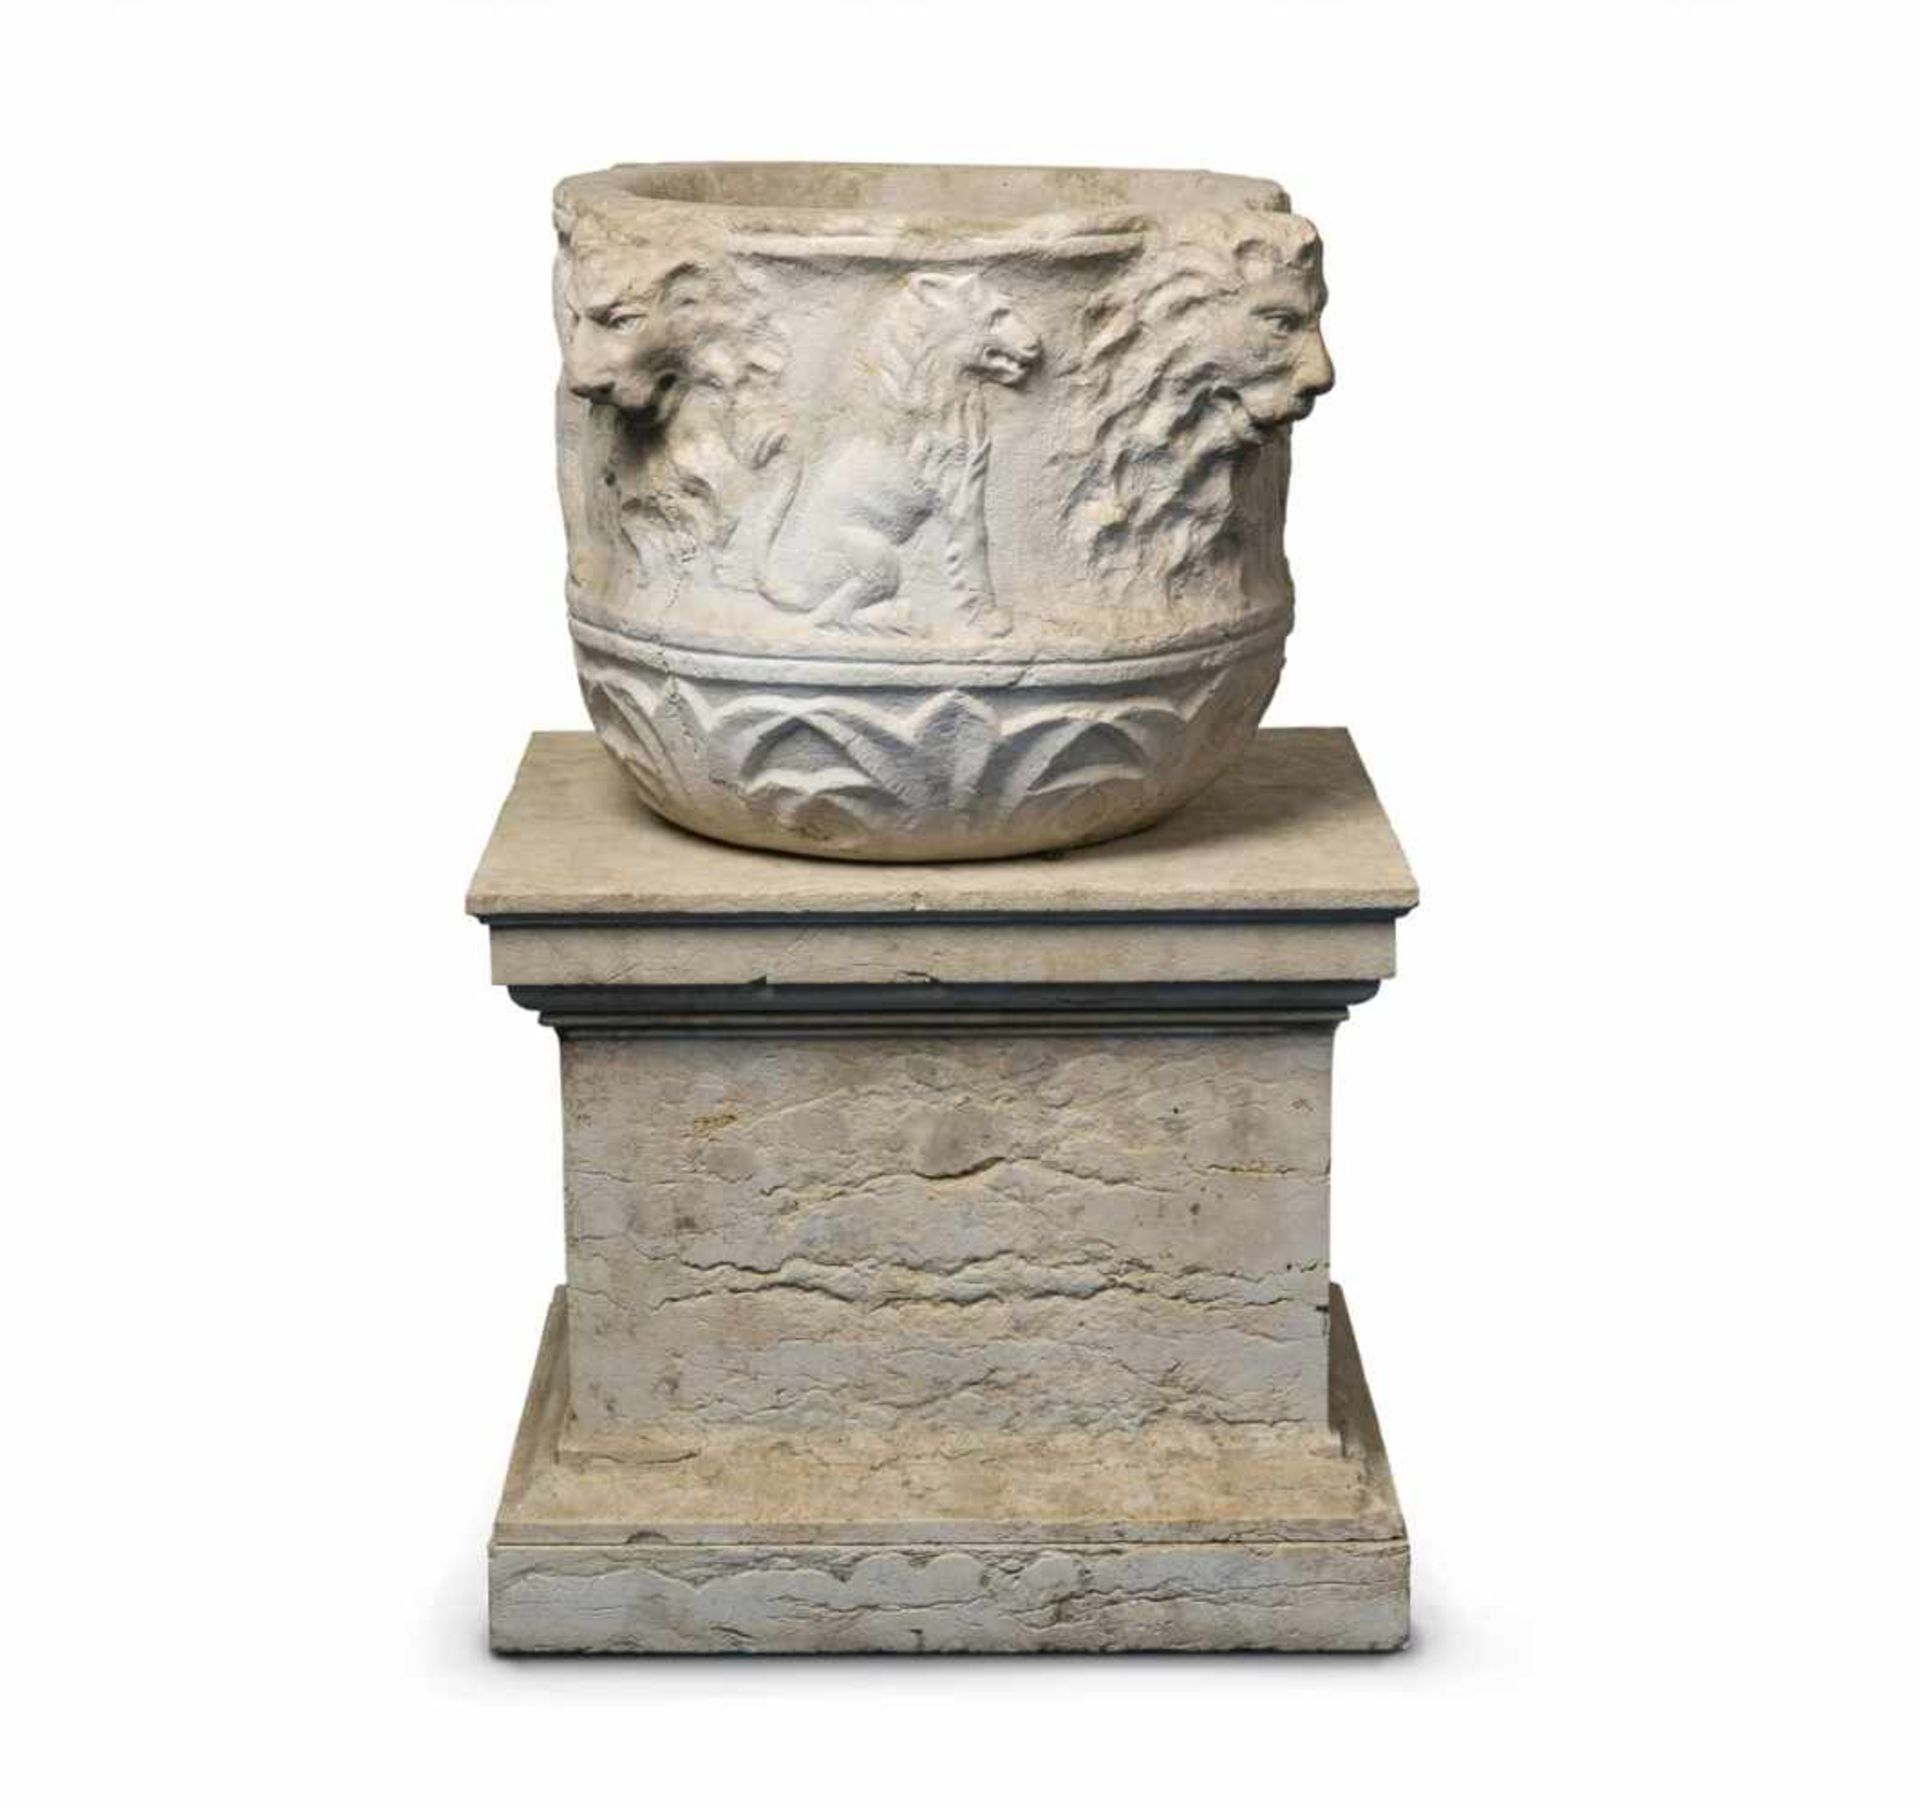 A white marble basin with four lion's headsDecorated with animal motifs including a lion and an